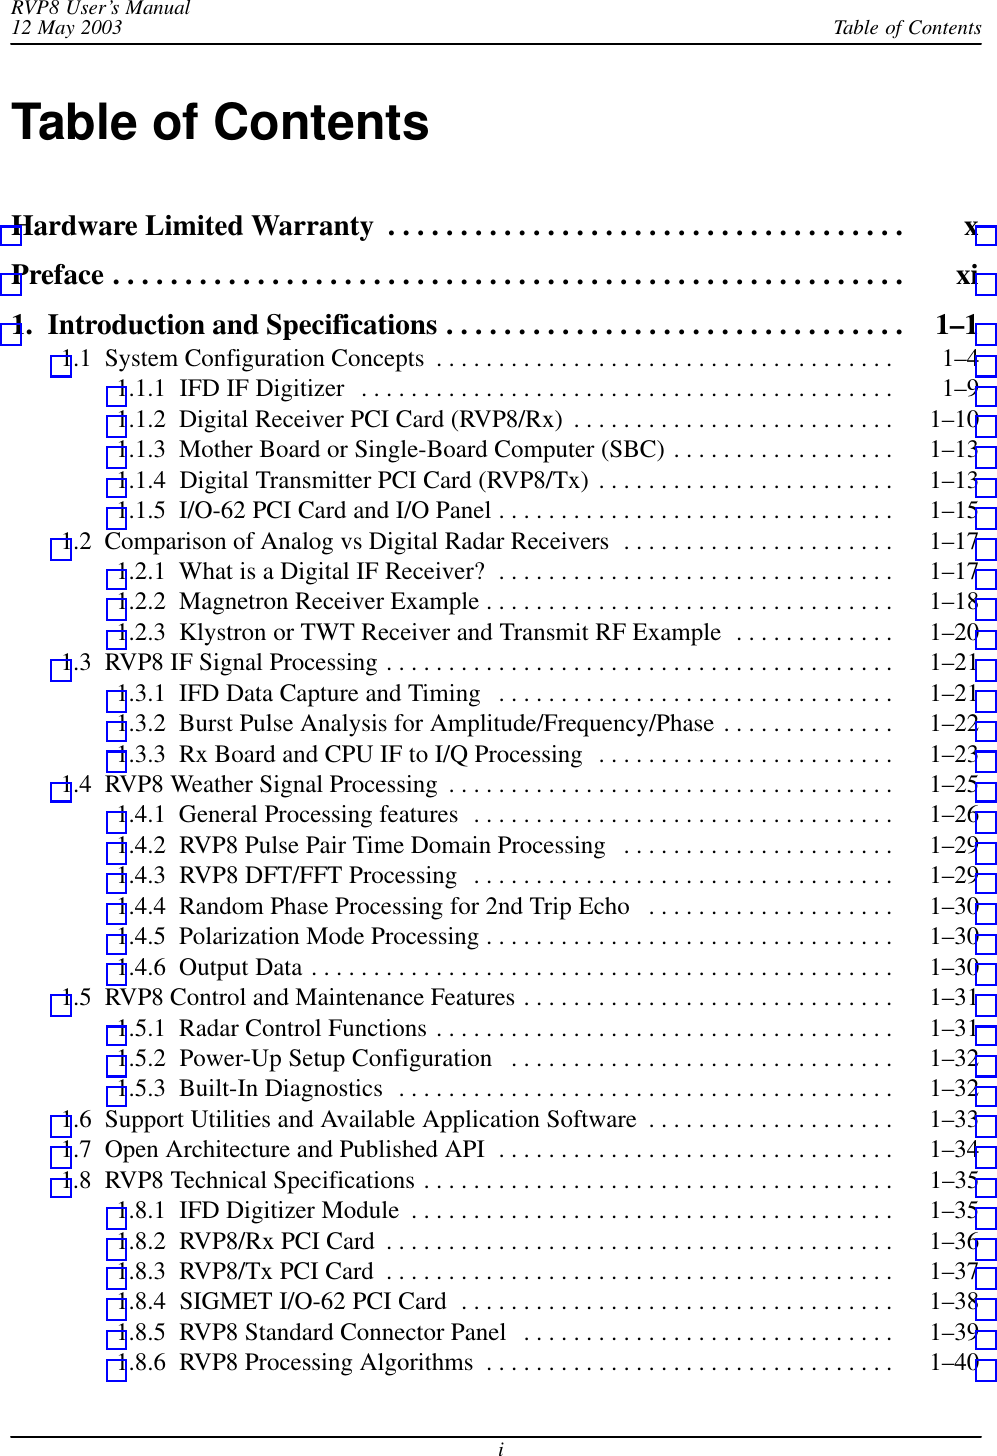 Table of ContentsRVP8 User’s Manual12 May 2003iTable of ContentsHardware Limited Warranty x . . . . . . . . . . . . . . . . . . . . . . . . . . . . . . . . . . . . Preface xi . . . . . . . . . . . . . . . . . . . . . . . . . . . . . . . . . . . . . . . . . . . . . . . . . . . . . . . 1.  Introduction and Specifications 1–1 . . . . . . . . . . . . . . . . . . . . . . . . . . . . . . . . 1.1  System Configuration Concepts 1–4 . . . . . . . . . . . . . . . . . . . . . . . . . . . . . . . . . . . . . 1.1.1  IFD IF Digitizer 1–9 . . . . . . . . . . . . . . . . . . . . . . . . . . . . . . . . . . . . . . . . . . . 1.1.2  Digital Receiver PCI Card (RVP8/Rx) 1–10 . . . . . . . . . . . . . . . . . . . . . . . . . . 1.1.3  Mother Board or Single-Board Computer (SBC) 1–13 . . . . . . . . . . . . . . . . . . 1.1.4  Digital Transmitter PCI Card (RVP8/Tx) 1–13 . . . . . . . . . . . . . . . . . . . . . . . . 1.1.5  I/O-62 PCI Card and I/O Panel 1–15 . . . . . . . . . . . . . . . . . . . . . . . . . . . . . . . . 1.2  Comparison of Analog vs Digital Radar Receivers 1–17 . . . . . . . . . . . . . . . . . . . . . . 1.2.1  What is a Digital IF Receiver? 1–17 . . . . . . . . . . . . . . . . . . . . . . . . . . . . . . . . 1.2.2  Magnetron Receiver Example 1–18 . . . . . . . . . . . . . . . . . . . . . . . . . . . . . . . . . 1.2.3  Klystron or TWT Receiver and Transmit RF Example 1–20 . . . . . . . . . . . . . 1.3  RVP8 IF Signal Processing 1–21 . . . . . . . . . . . . . . . . . . . . . . . . . . . . . . . . . . . . . . . . . 1.3.1  IFD Data Capture and Timing 1–21 . . . . . . . . . . . . . . . . . . . . . . . . . . . . . . . . 1.3.2  Burst Pulse Analysis for Amplitude/Frequency/Phase 1–22 . . . . . . . . . . . . . . 1.3.3  Rx Board and CPU IF to I/Q Processing 1–23 . . . . . . . . . . . . . . . . . . . . . . . . 1.4  RVP8 Weather Signal Processing 1–25 . . . . . . . . . . . . . . . . . . . . . . . . . . . . . . . . . . . . 1.4.1  General Processing features 1–26 . . . . . . . . . . . . . . . . . . . . . . . . . . . . . . . . . . 1.4.2  RVP8 Pulse Pair Time Domain Processing 1–29 . . . . . . . . . . . . . . . . . . . . . . 1.4.3  RVP8 DFT/FFT Processing 1–29 . . . . . . . . . . . . . . . . . . . . . . . . . . . . . . . . . . 1.4.4  Random Phase Processing for 2nd Trip Echo 1–30 . . . . . . . . . . . . . . . . . . . . 1.4.5  Polarization Mode Processing 1–30 . . . . . . . . . . . . . . . . . . . . . . . . . . . . . . . . . 1.4.6  Output Data 1–30 . . . . . . . . . . . . . . . . . . . . . . . . . . . . . . . . . . . . . . . . . . . . . . . 1.5  RVP8 Control and Maintenance Features 1–31 . . . . . . . . . . . . . . . . . . . . . . . . . . . . . . 1.5.1  Radar Control Functions 1–31 . . . . . . . . . . . . . . . . . . . . . . . . . . . . . . . . . . . . . 1.5.2  Power-Up Setup Configuration 1–32 . . . . . . . . . . . . . . . . . . . . . . . . . . . . . . . 1.5.3  Built-In Diagnostics 1–32 . . . . . . . . . . . . . . . . . . . . . . . . . . . . . . . . . . . . . . . . 1.6  Support Utilities and Available Application Software 1–33 . . . . . . . . . . . . . . . . . . . . 1.7  Open Architecture and Published API 1–34 . . . . . . . . . . . . . . . . . . . . . . . . . . . . . . . . 1.8  RVP8 Technical Specifications 1–35 . . . . . . . . . . . . . . . . . . . . . . . . . . . . . . . . . . . . . . 1.8.1  IFD Digitizer Module 1–35 . . . . . . . . . . . . . . . . . . . . . . . . . . . . . . . . . . . . . . . 1.8.2  RVP8/Rx PCI Card 1–36 . . . . . . . . . . . . . . . . . . . . . . . . . . . . . . . . . . . . . . . . . 1.8.3  RVP8/Tx PCI Card 1–37 . . . . . . . . . . . . . . . . . . . . . . . . . . . . . . . . . . . . . . . . . 1.8.4  SIGMET I/O-62 PCI Card 1–38 . . . . . . . . . . . . . . . . . . . . . . . . . . . . . . . . . . . 1.8.5  RVP8 Standard Connector Panel 1–39 . . . . . . . . . . . . . . . . . . . . . . . . . . . . . . 1.8.6  RVP8 Processing Algorithms 1–40 . . . . . . . . . . . . . . . . . . . . . . . . . . . . . . . . . 